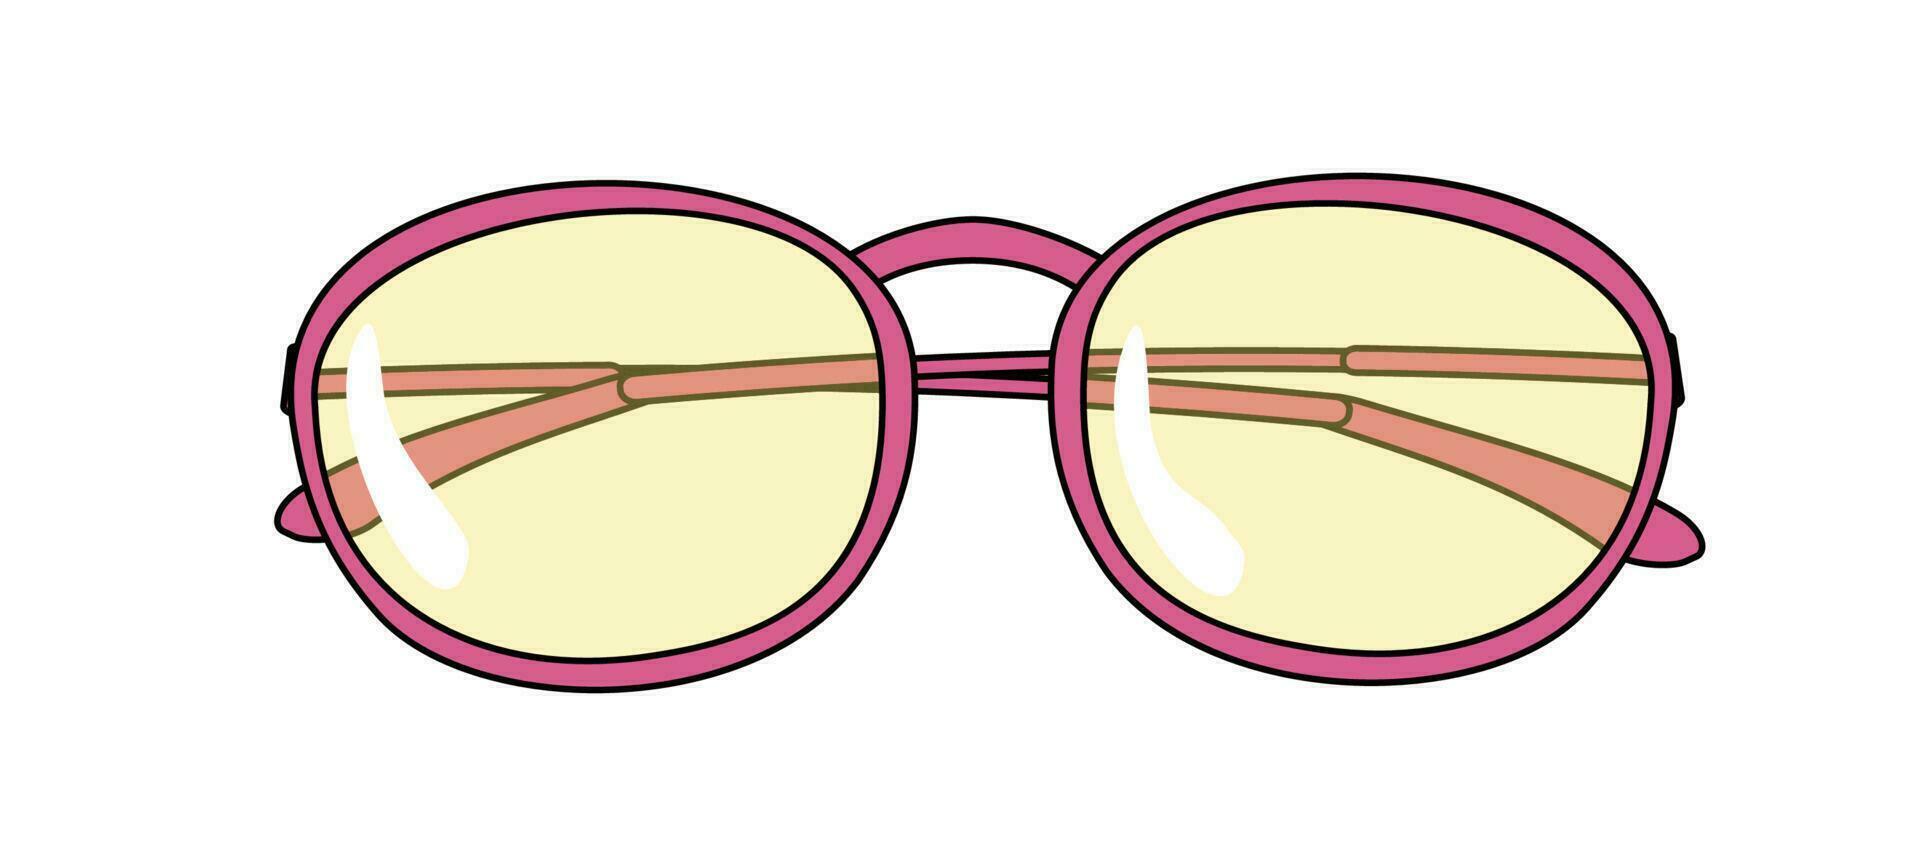 Glasses with oval frame and folded earpieces vector